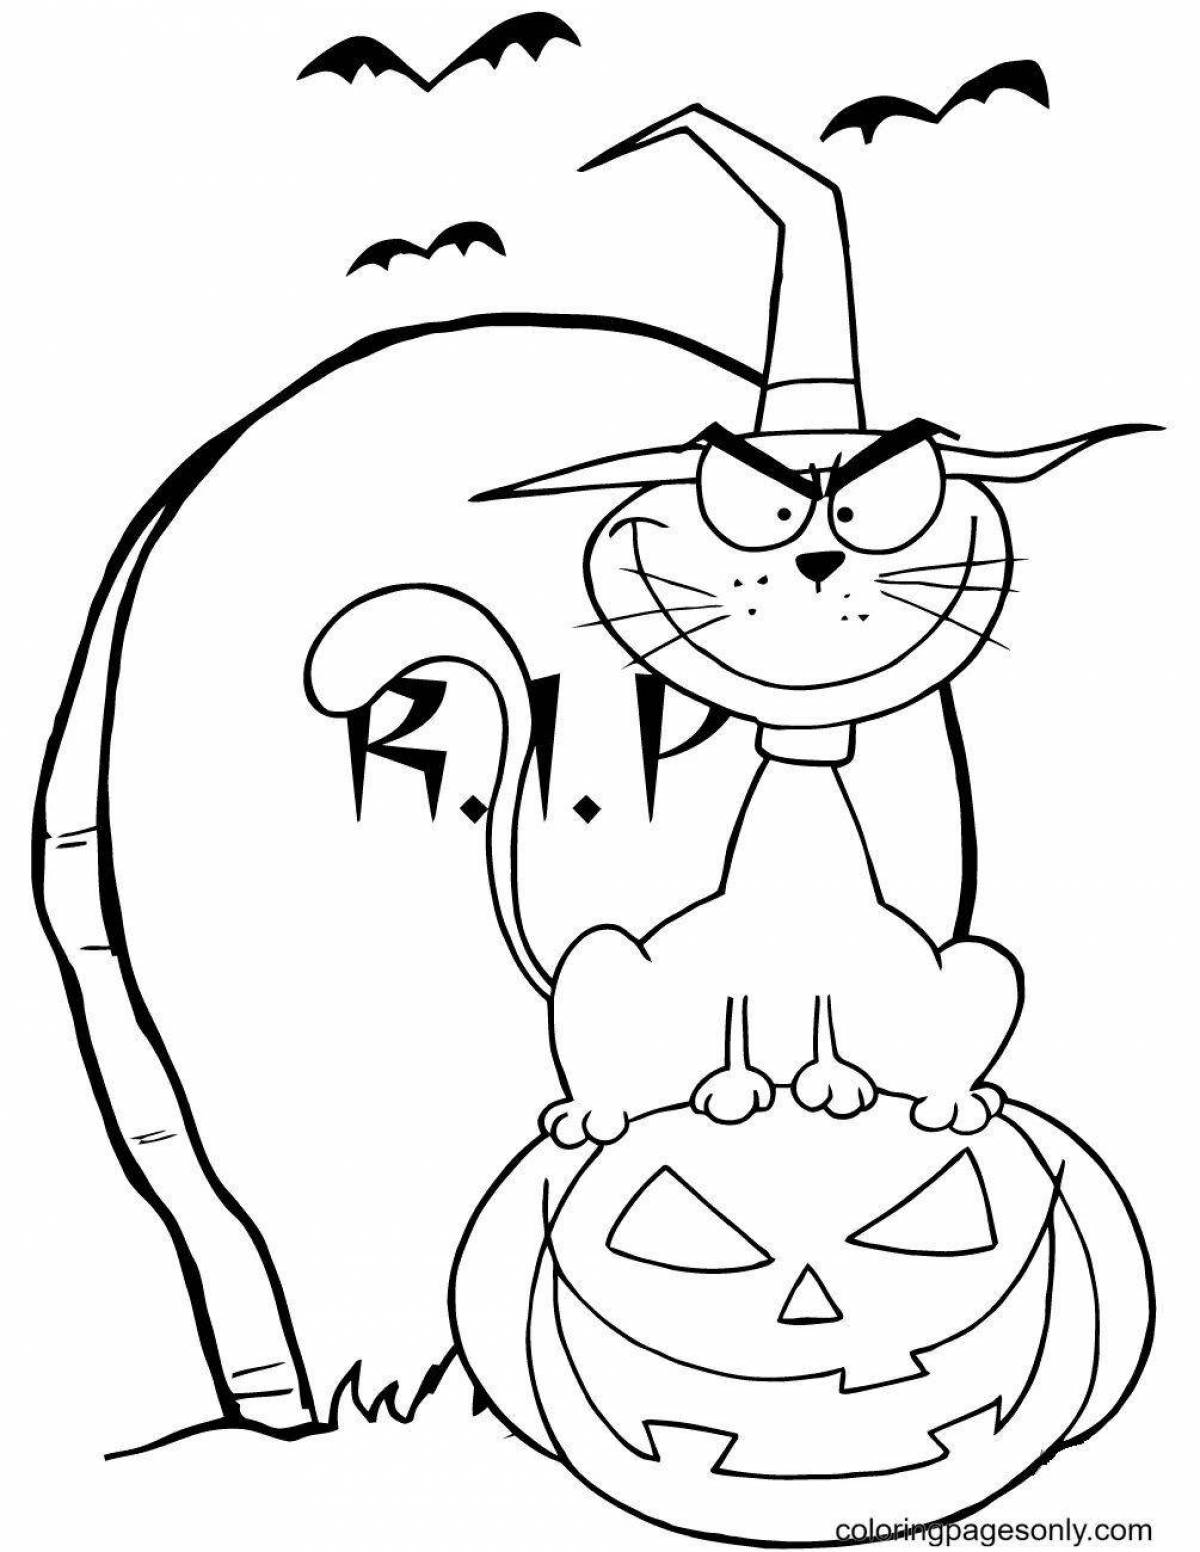 Coloring page terrible domestic cat